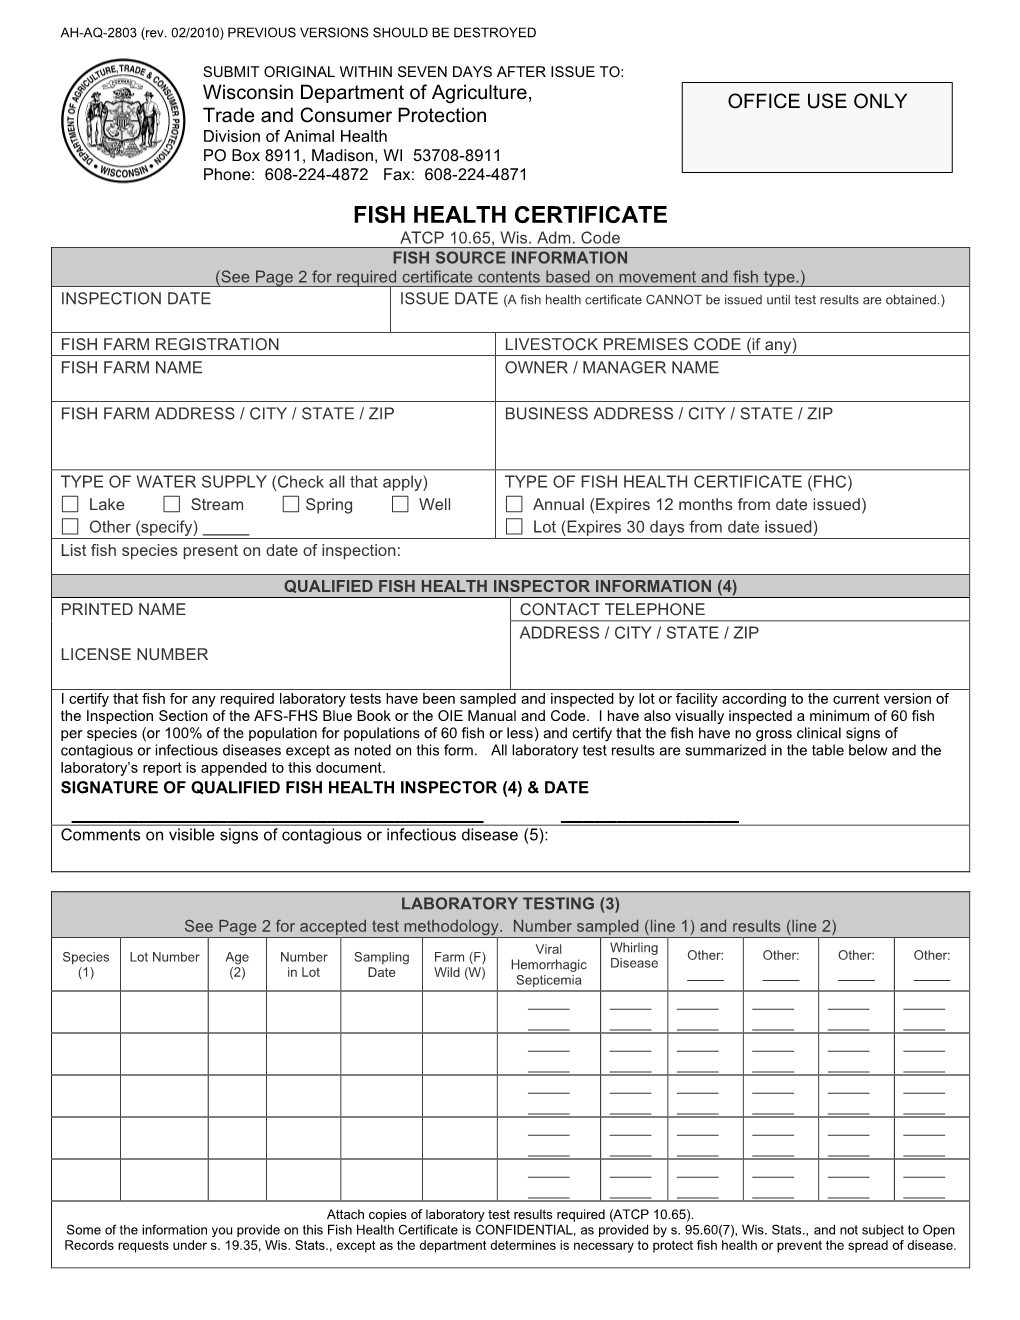 FISH HEALTH CERTIFICATE ATCP 10.65, Wis